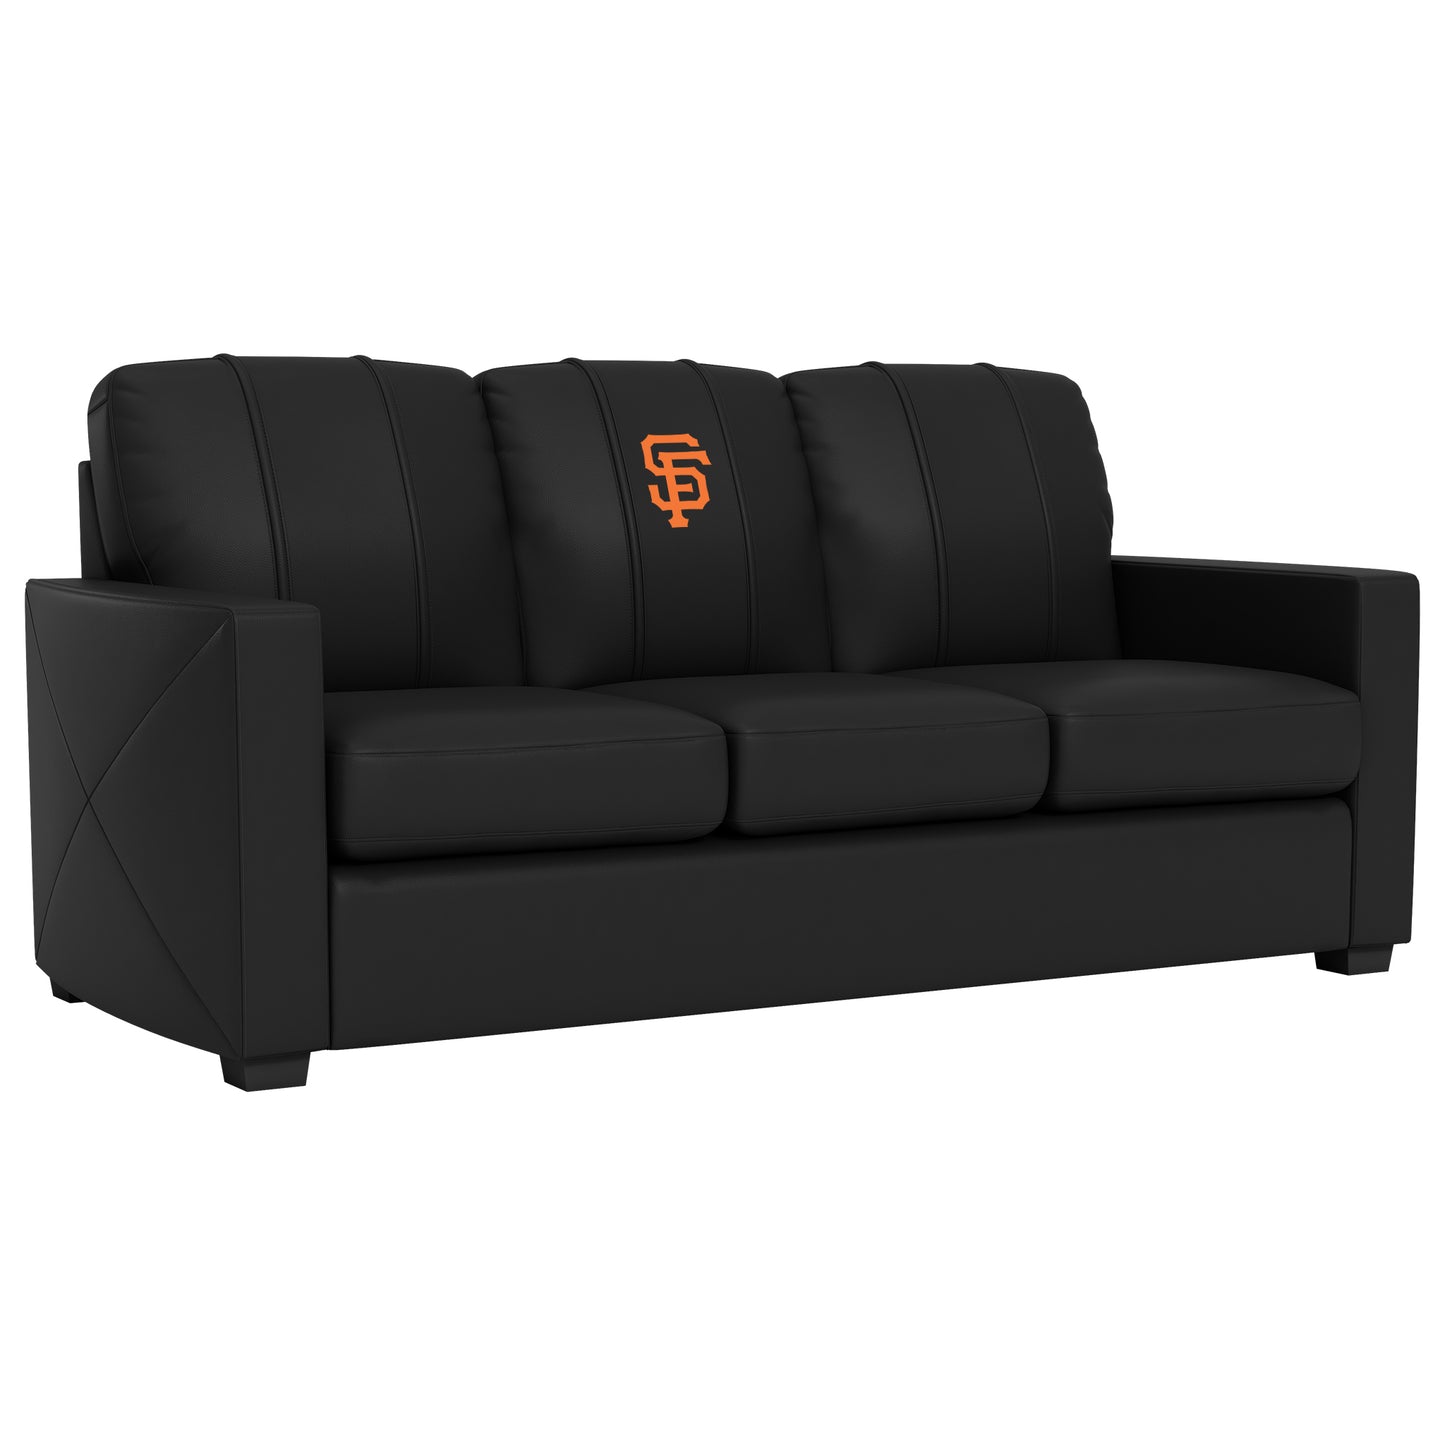 Silver Sofa with San Francisco Giants Secondary